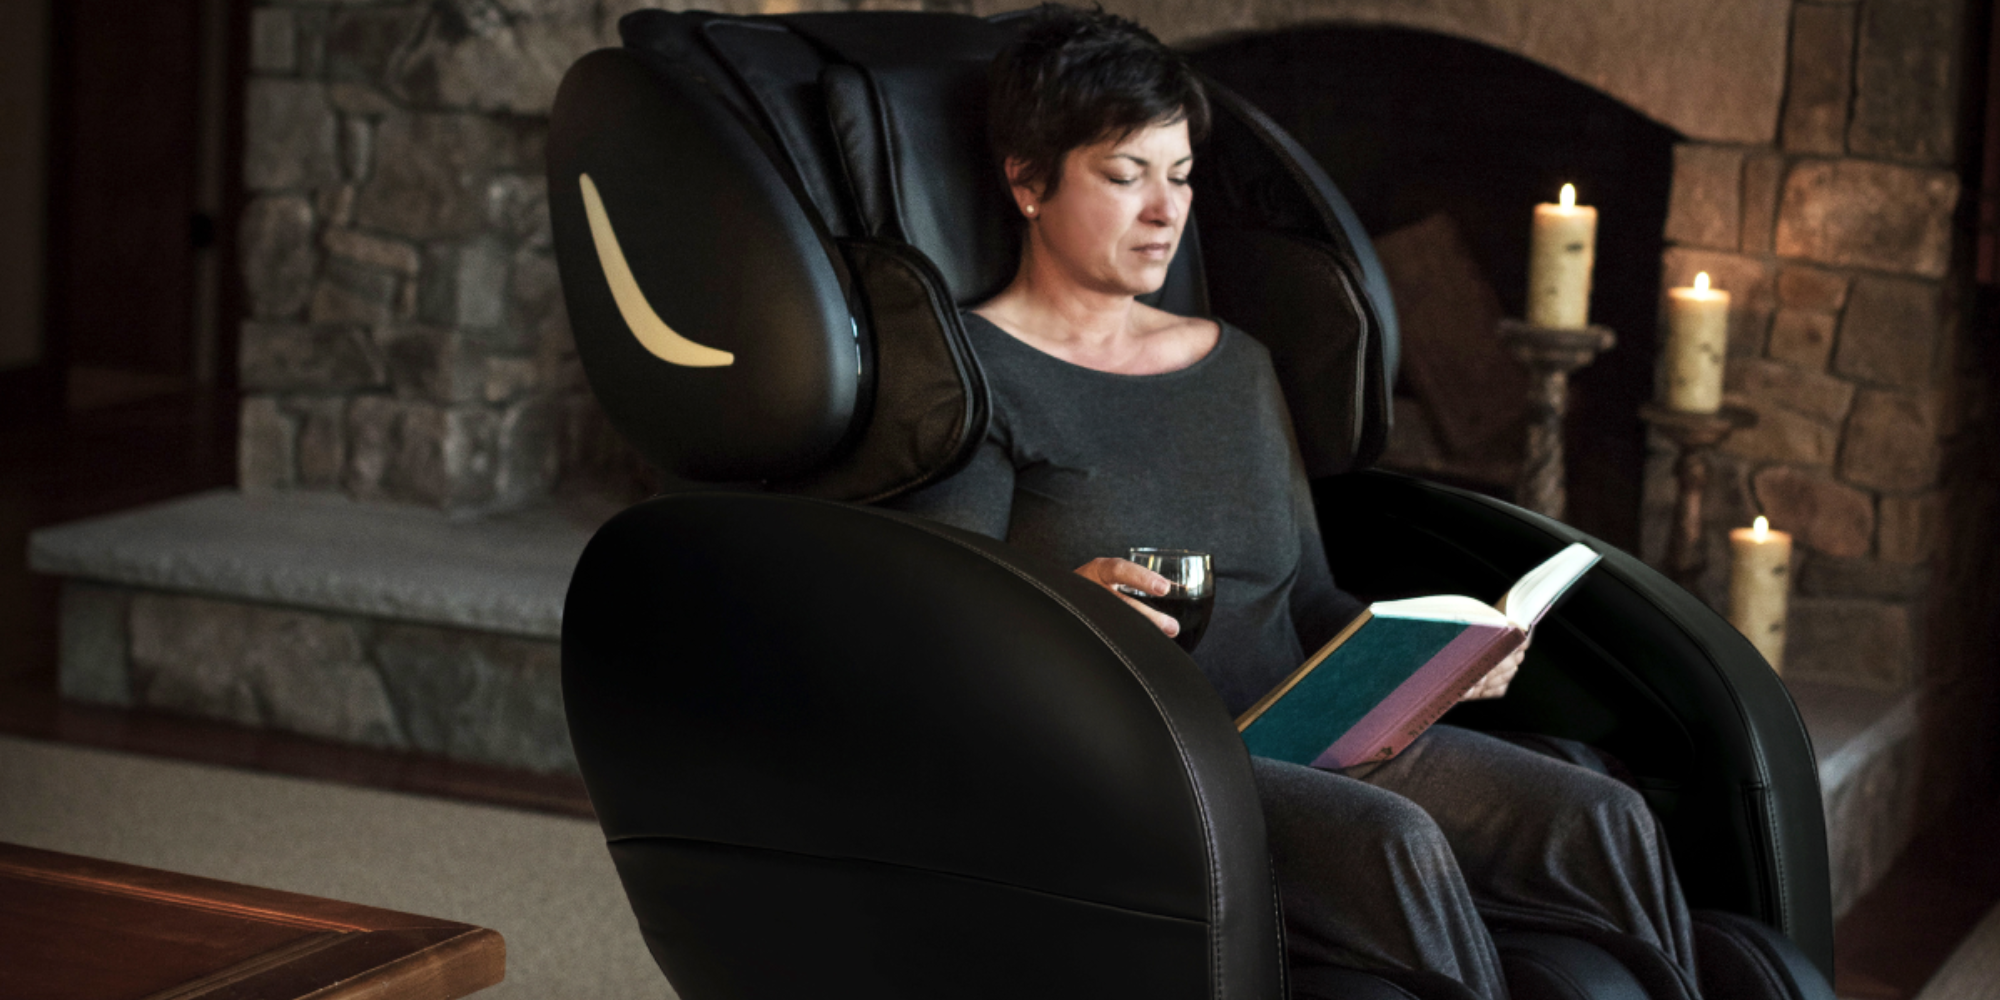 Buyer’s Guide: 4D Massage Chairs